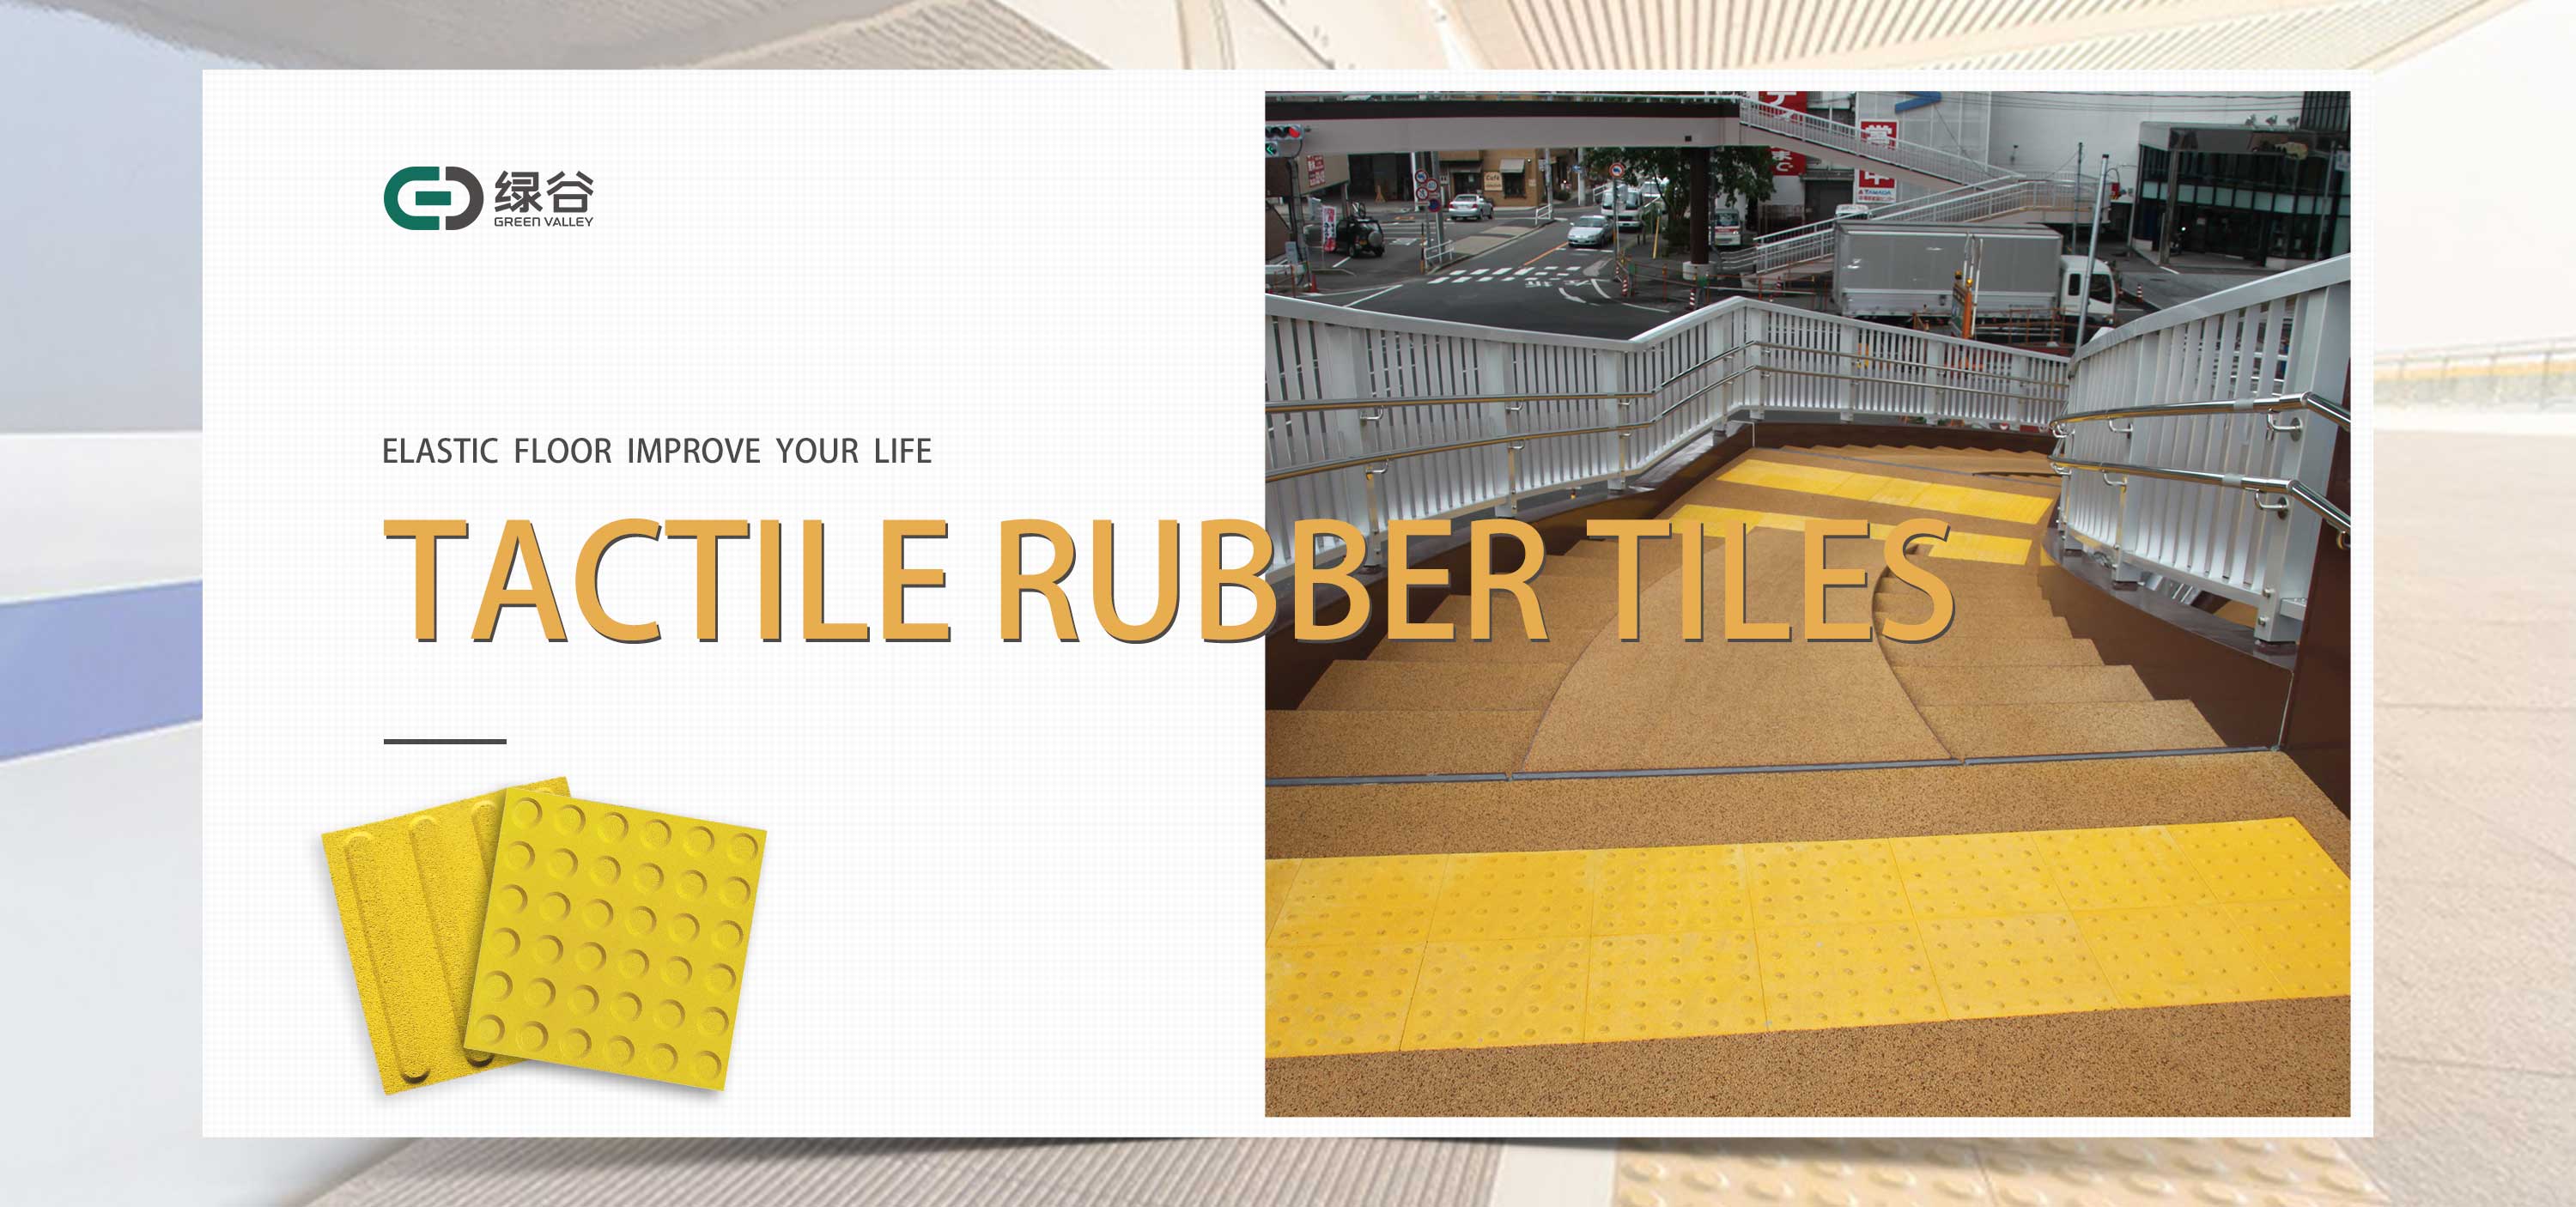 Product Recommendation | Green Valley Tactile Rubber Tiles